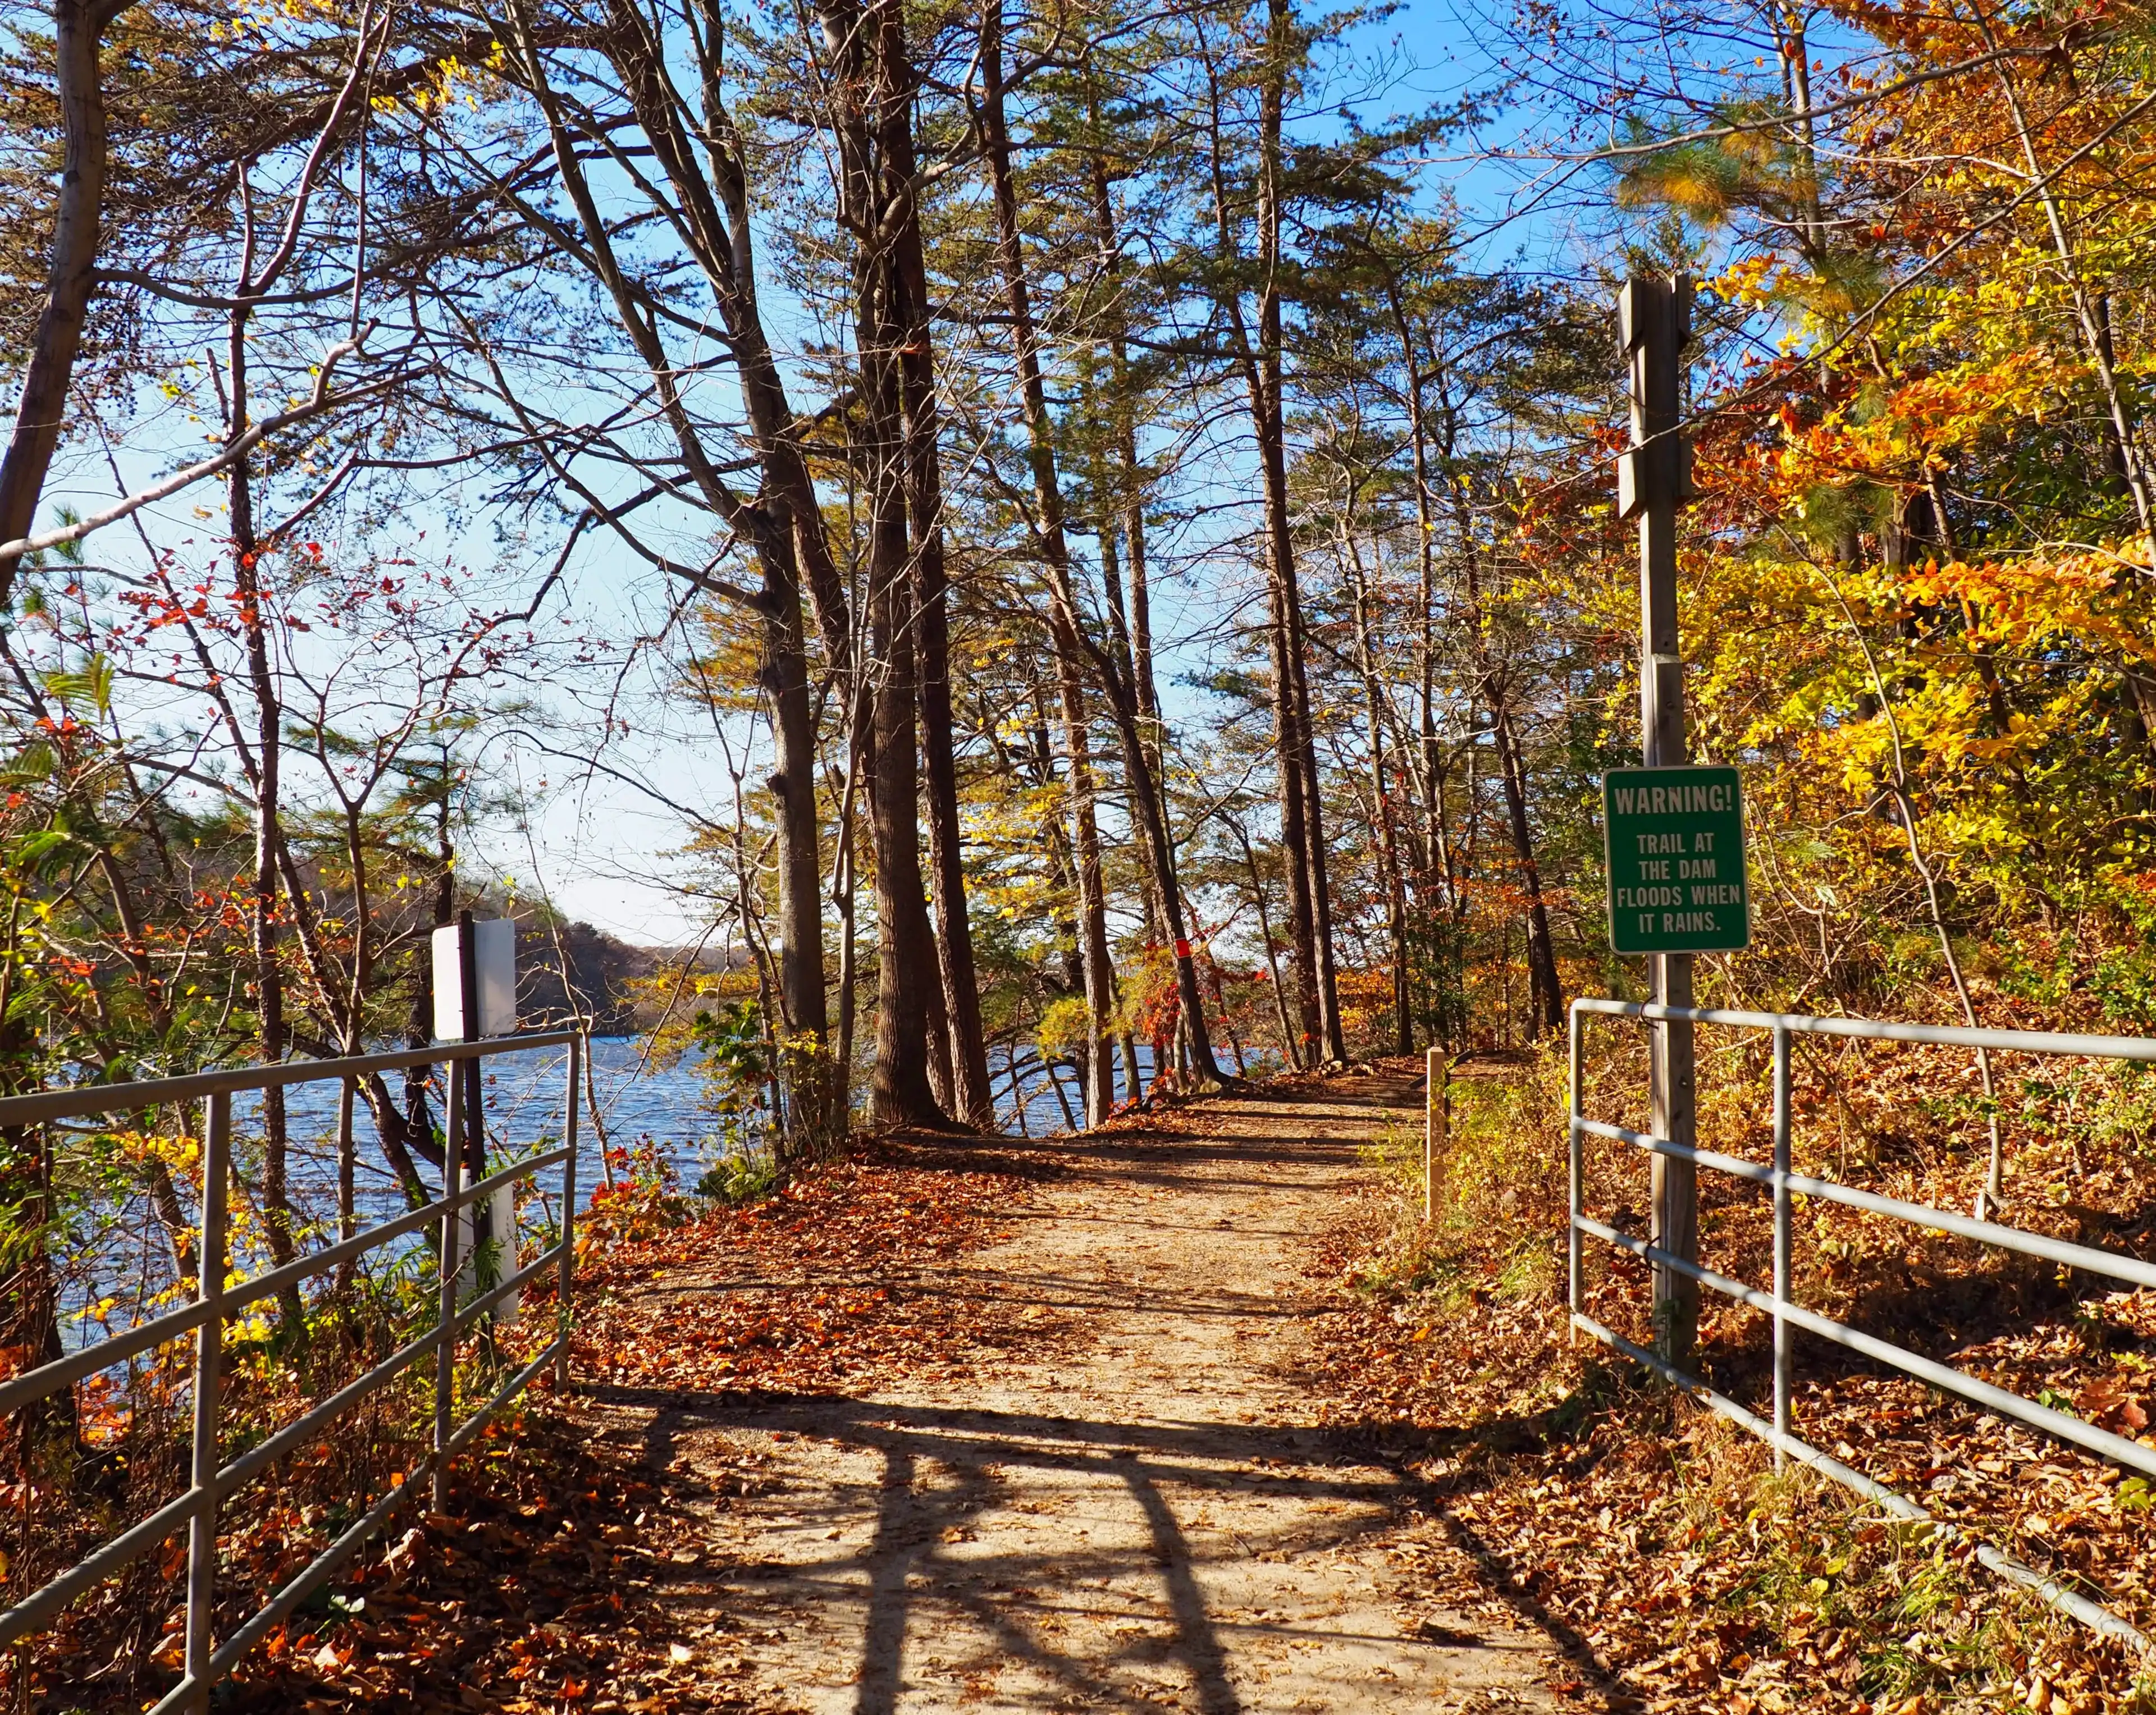 A trail at Lake Accotink, Springfield, northern Virginia in autumn/ fall